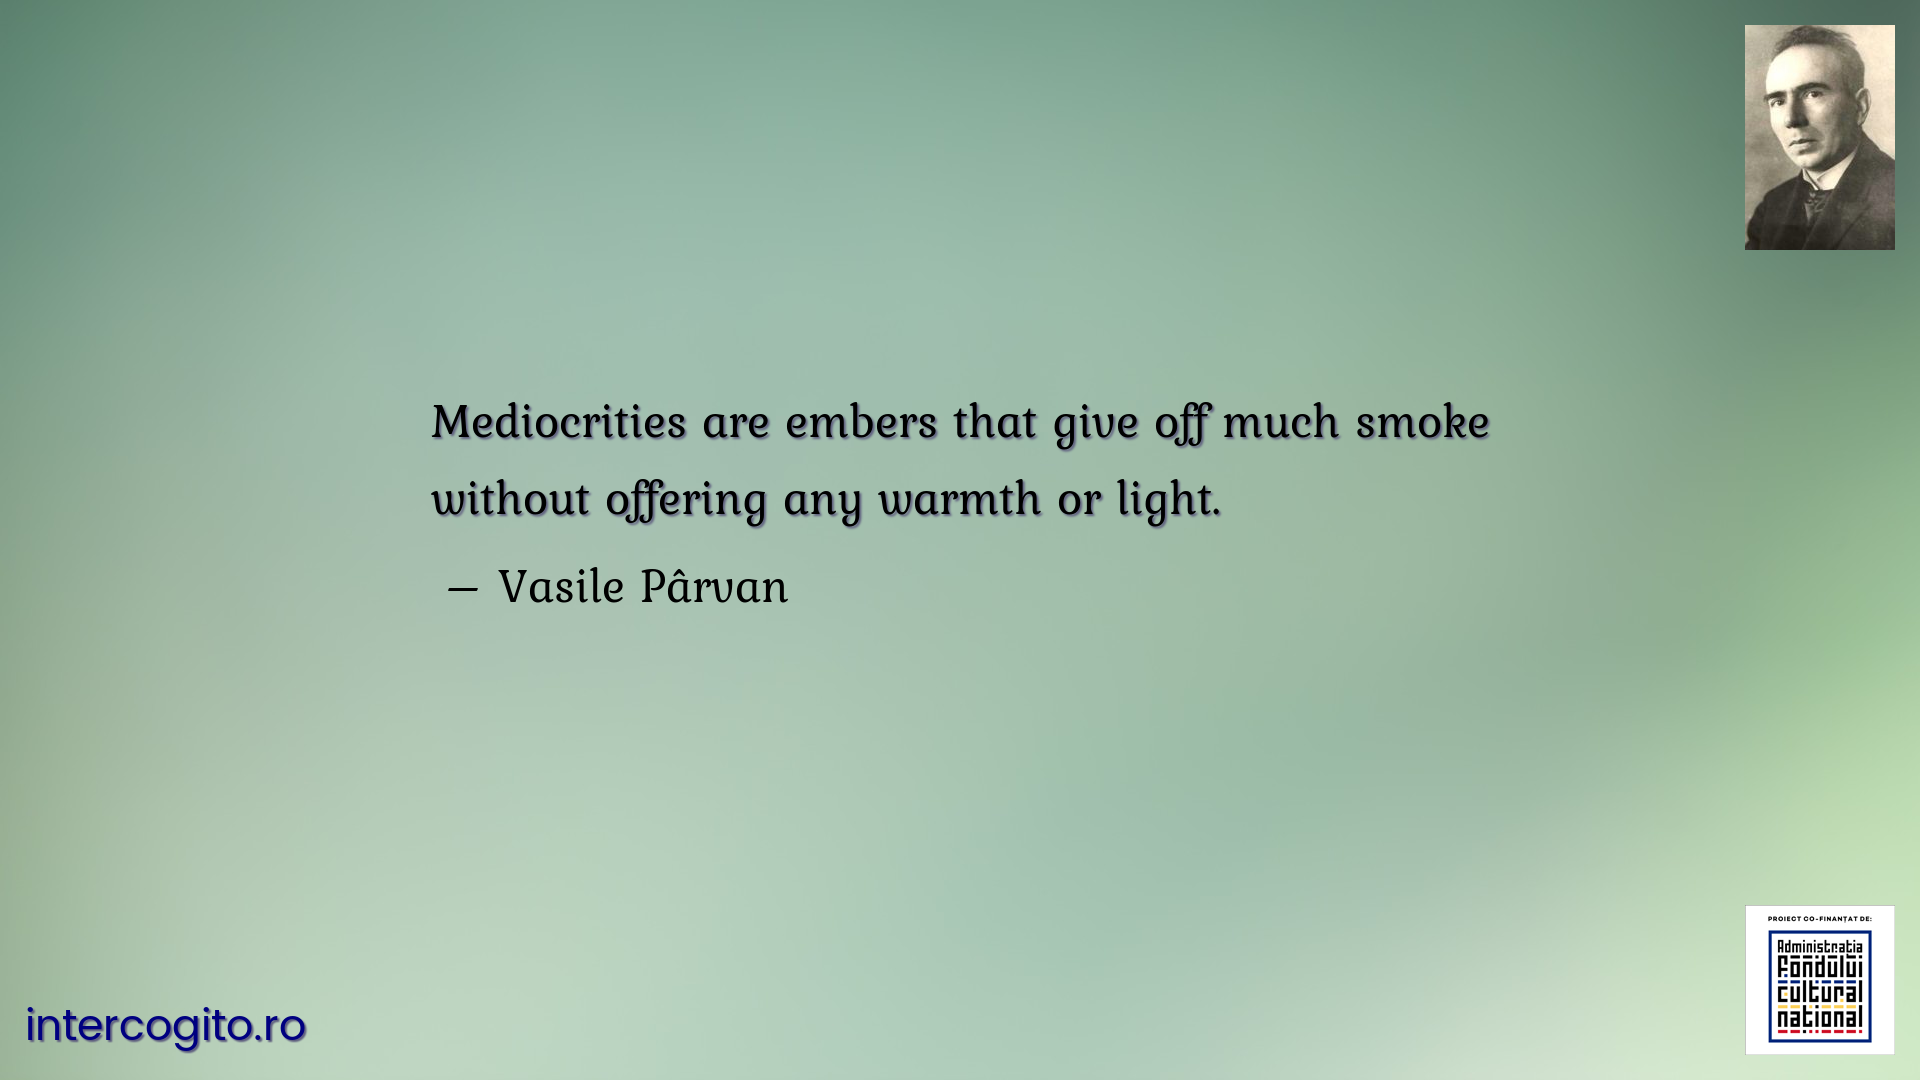 Mediocrities are embers that give off much smoke without offering any warmth or light.